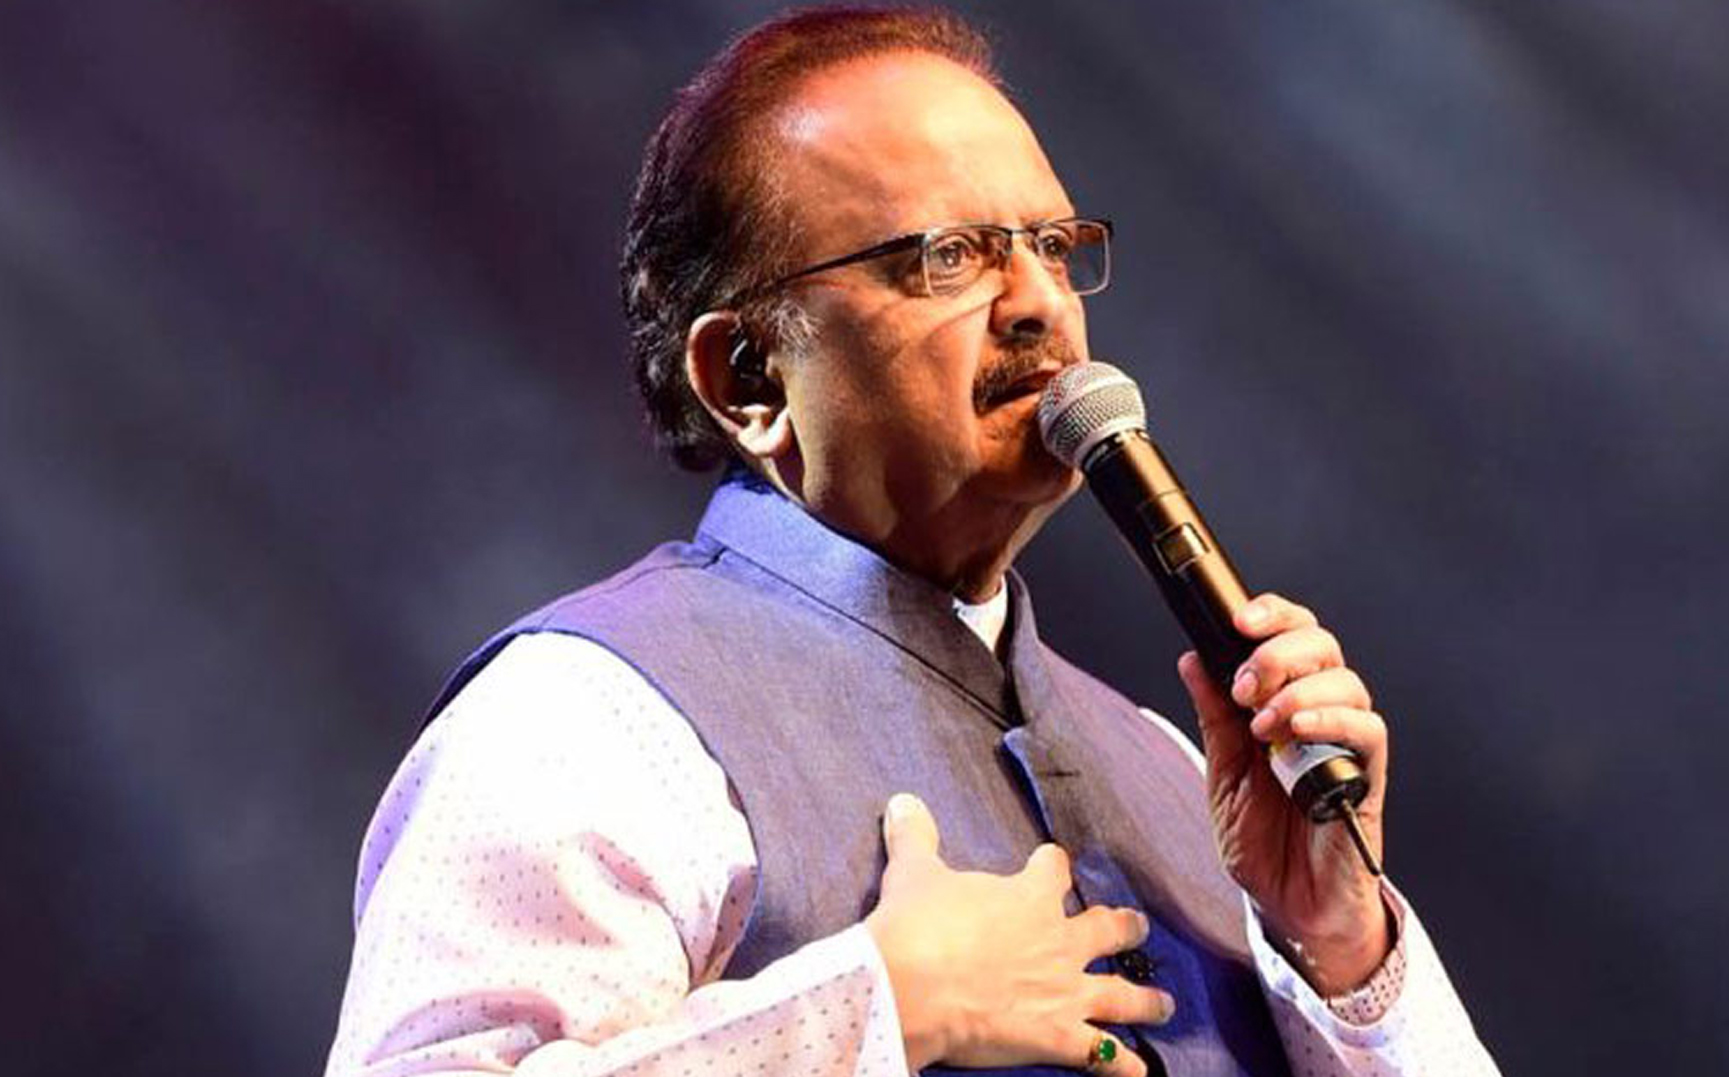 SP Balasubrahmanyam had repaid every debt. He has sis studio named after Kodandapani who gave the first chance to perform as a playback singer.